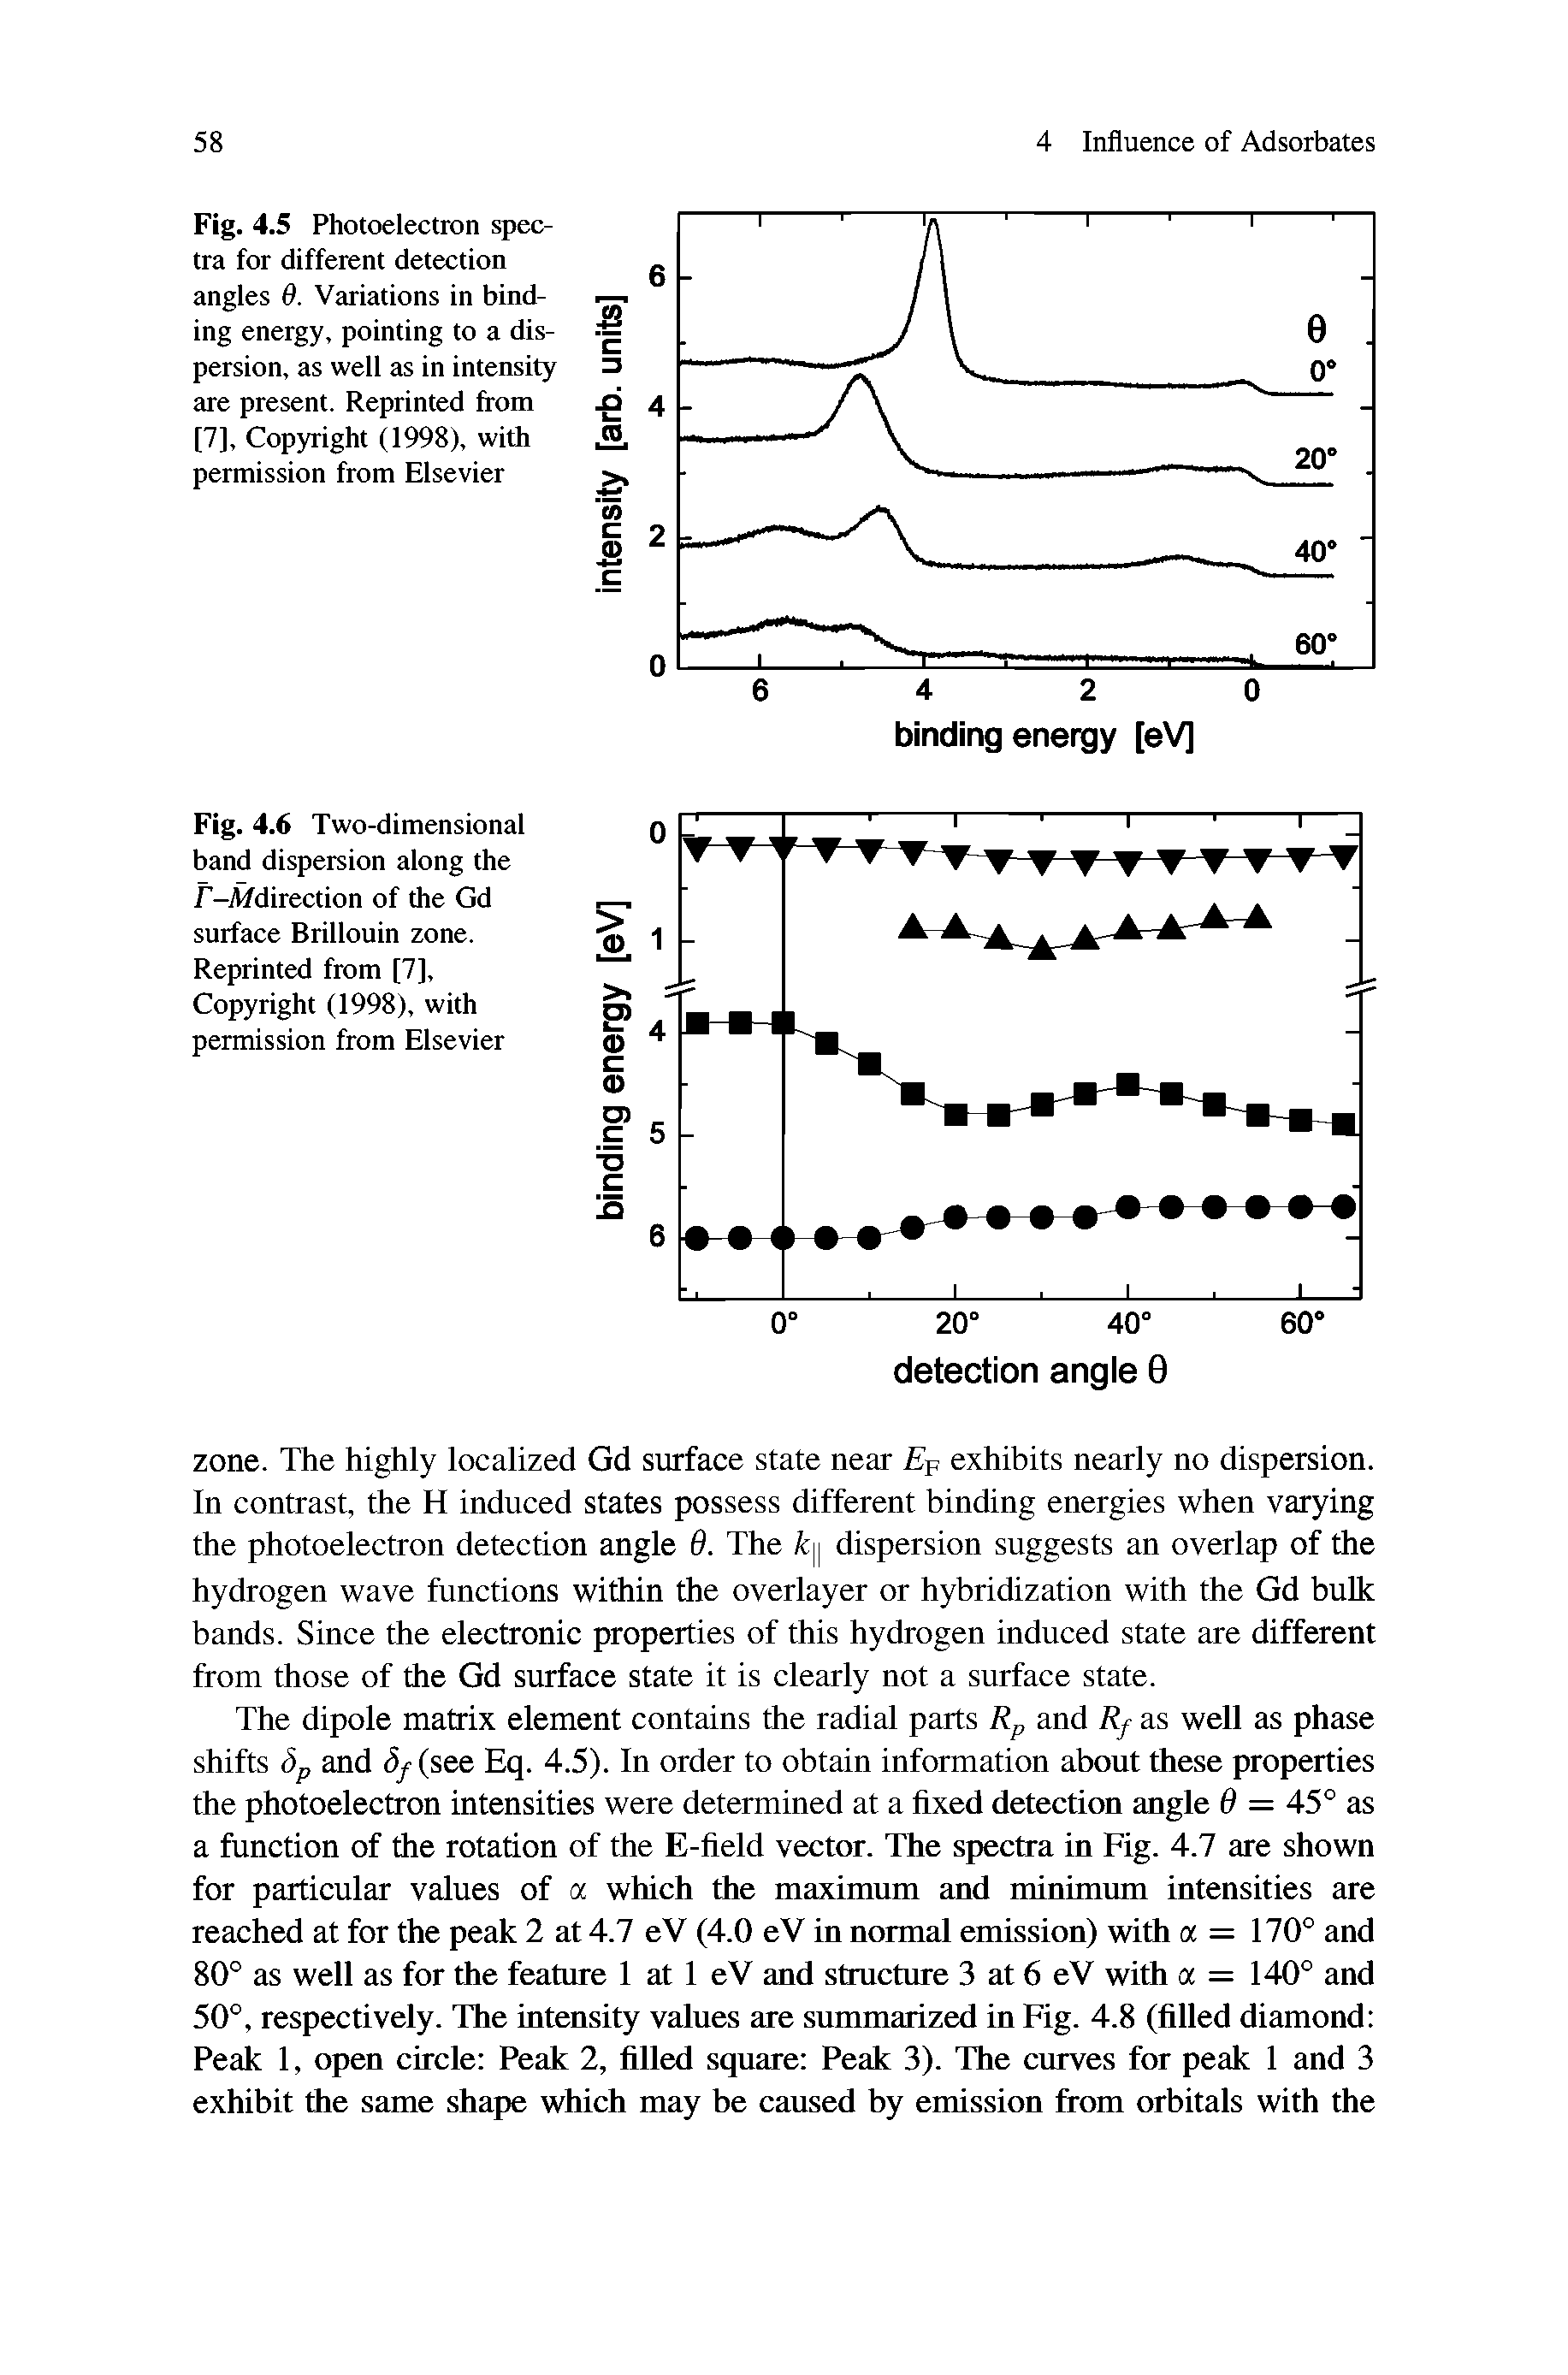 Fig. 4.6 Two-dimensional band dispersion along the T-A/direction of the Gd surface Brillouin zone. Reprinted from [7], Copyright (1998), with permission from Elsevier...